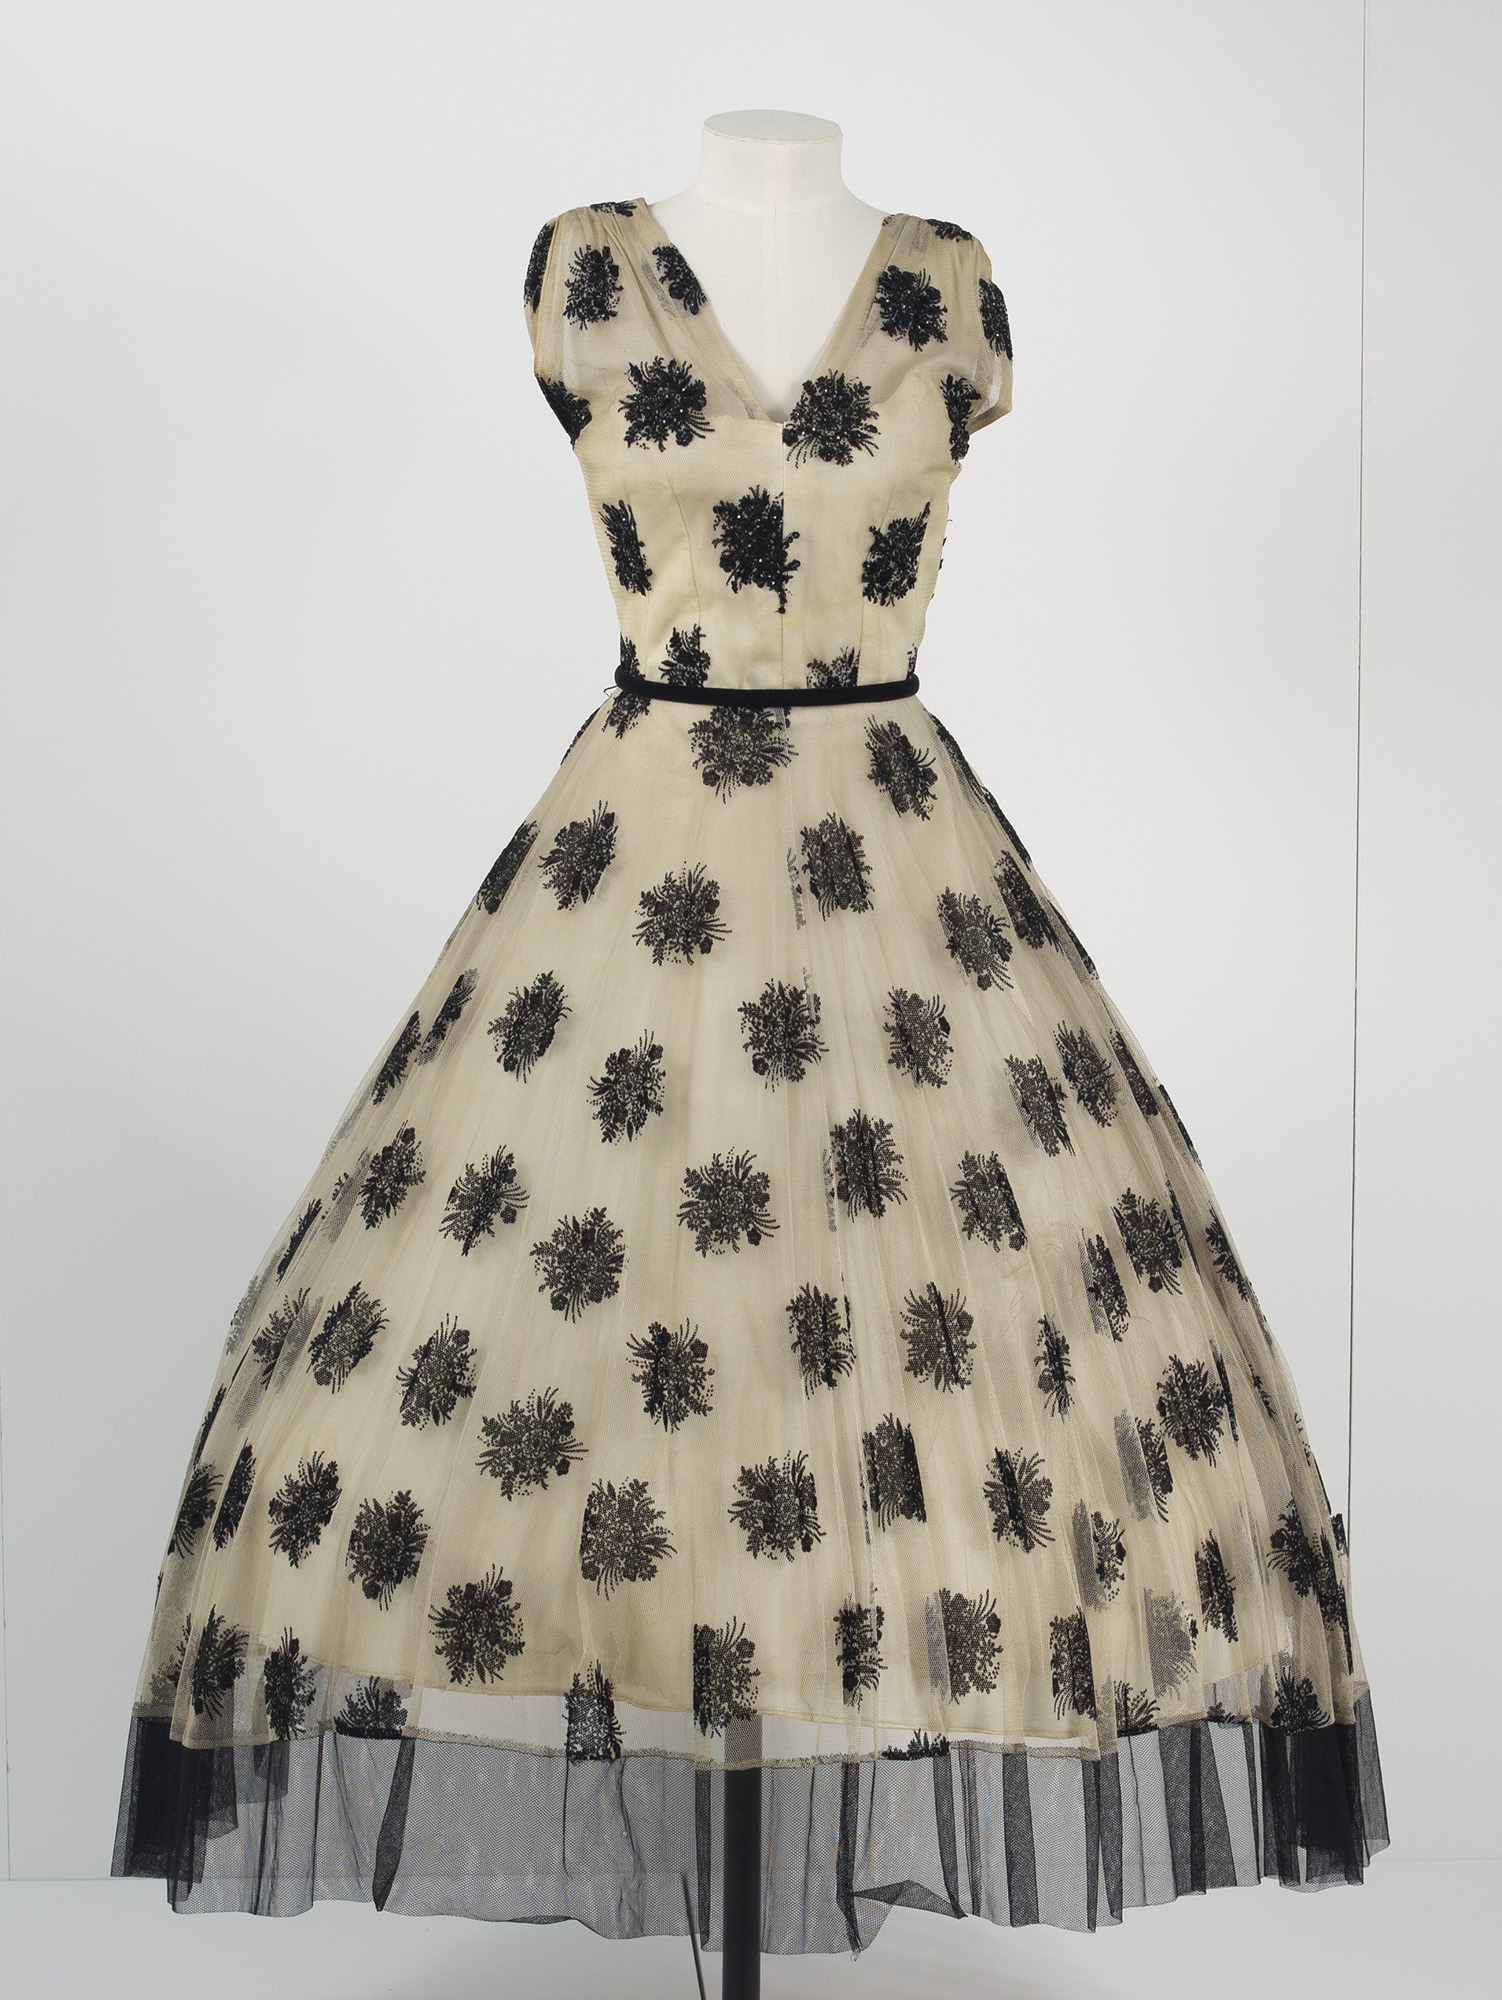 A formal 1950s v-necked, fit and flare dress in cream with a black floral pattern, short sleeves and a cinched black waistband